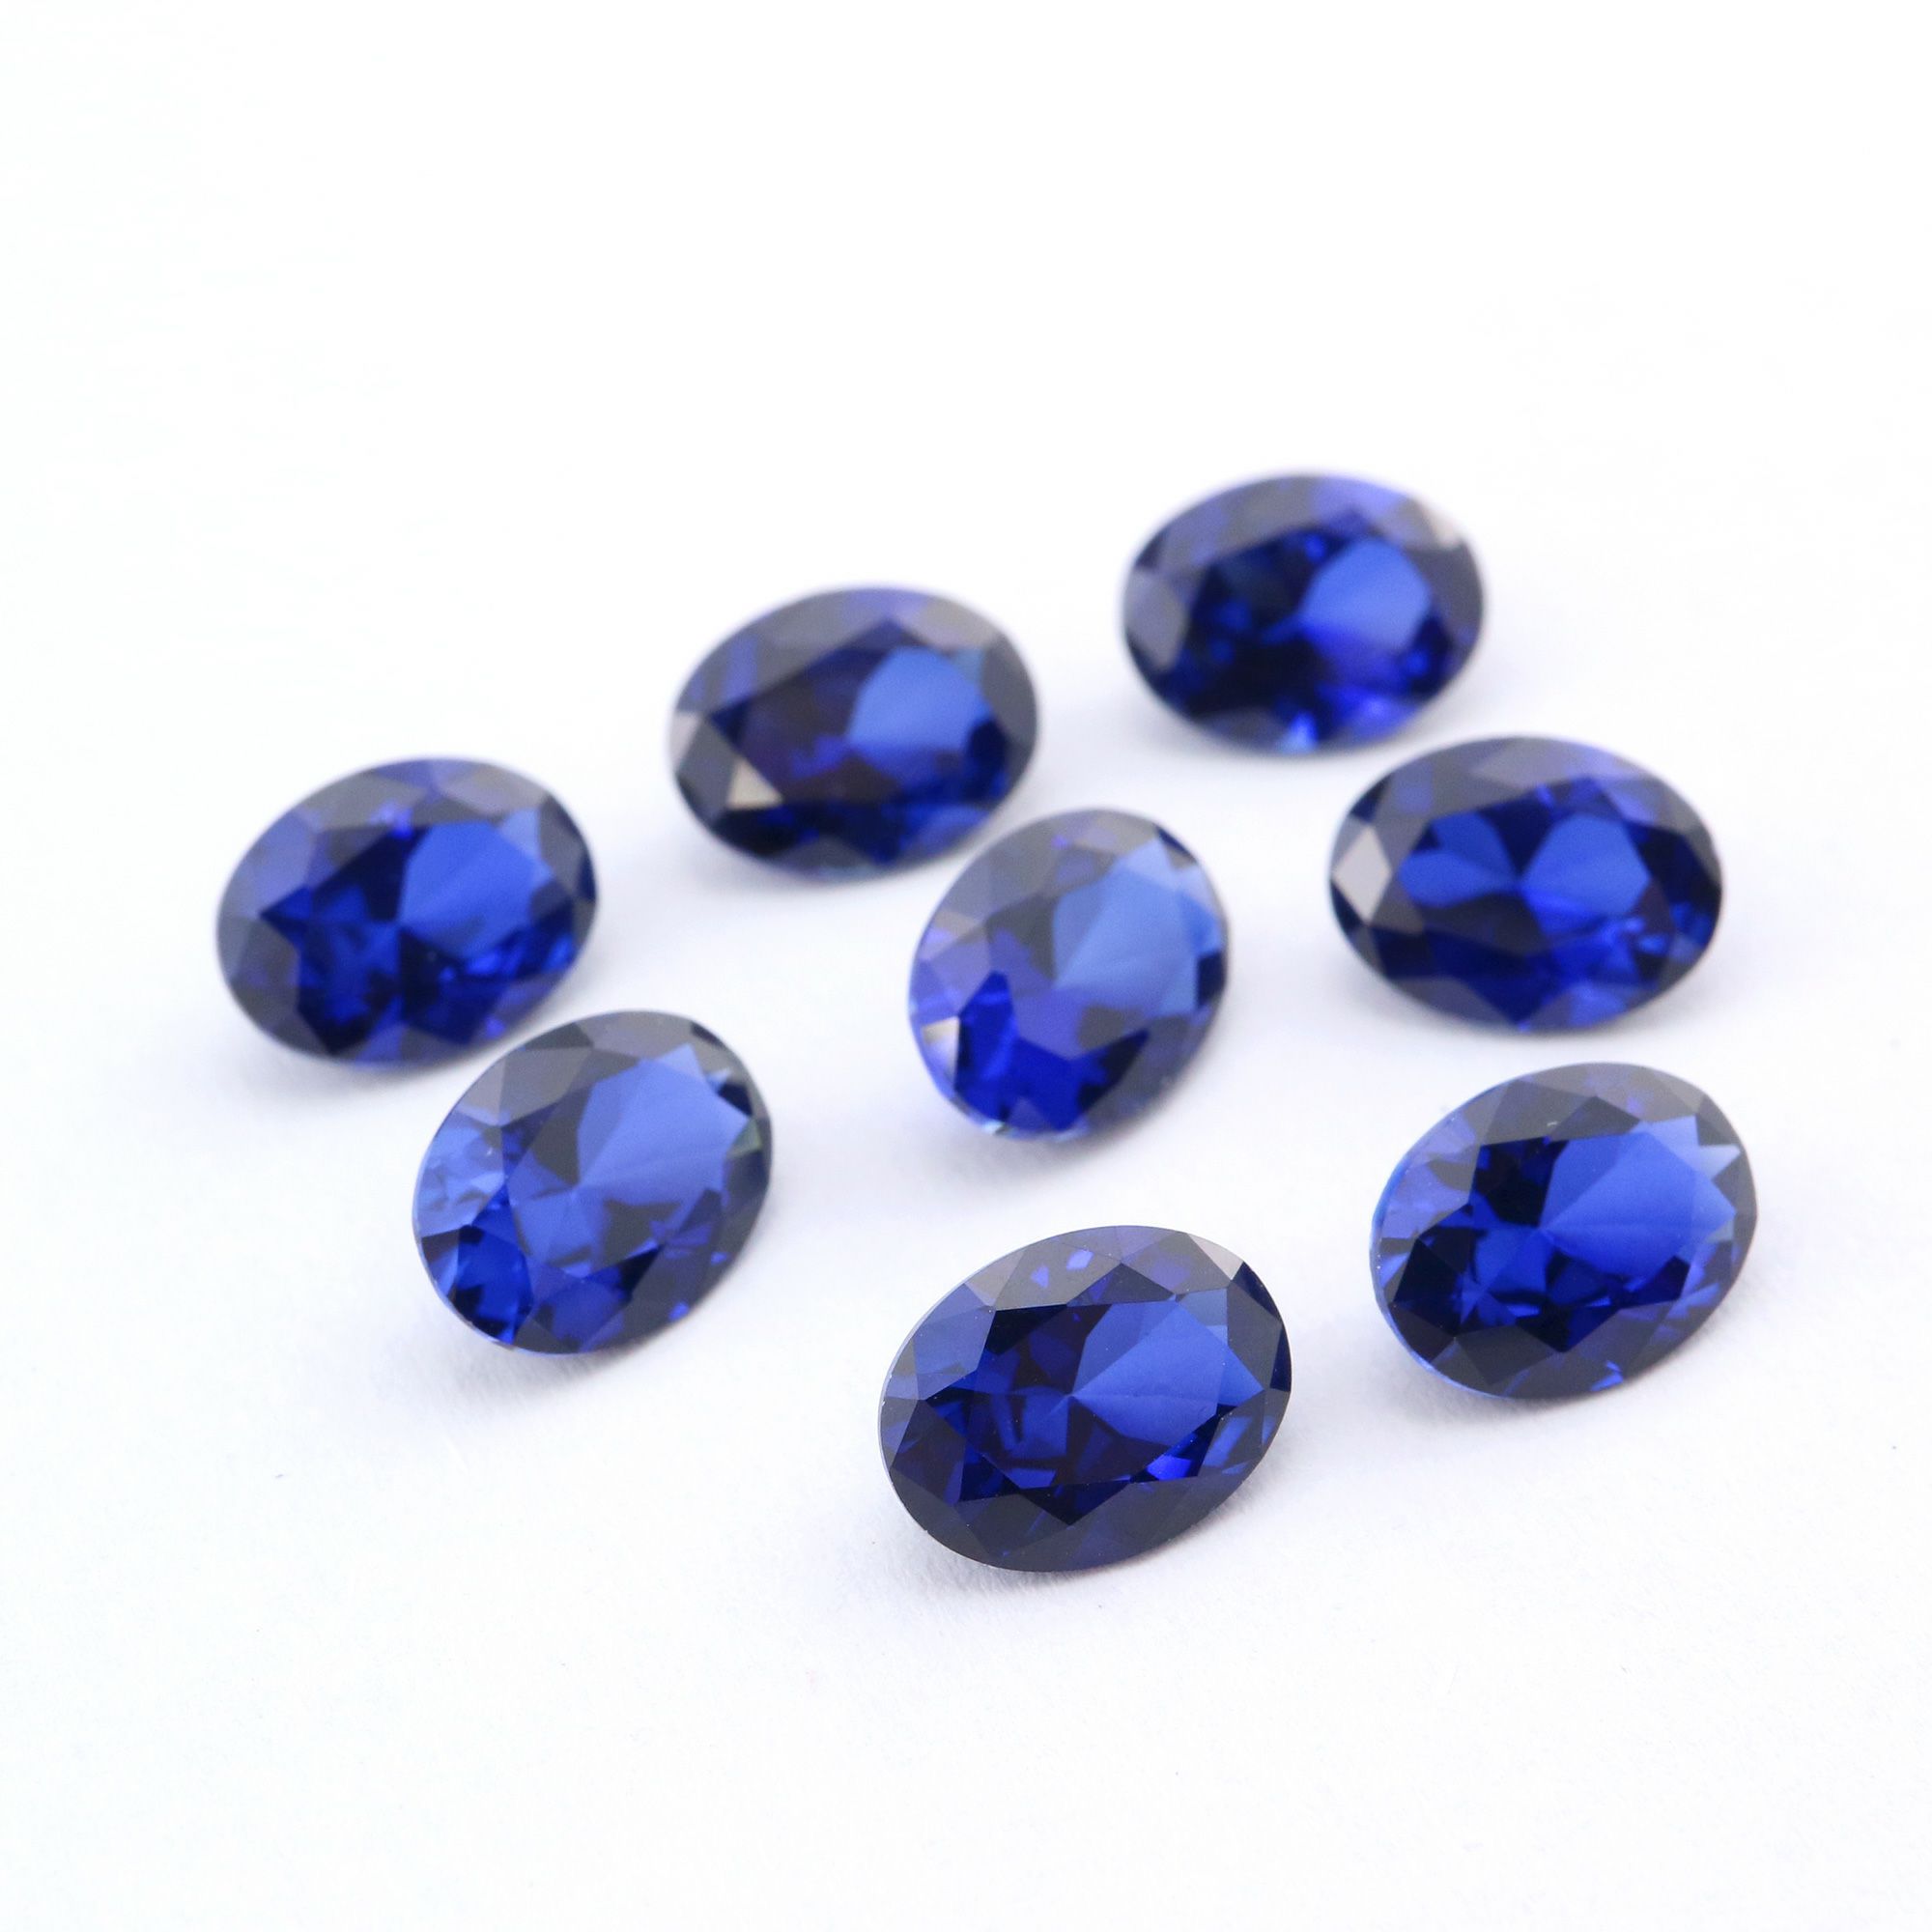 5Pcs Lab Created Oval Sapphire September Birthstone Blue Faceted Loose Gemstone DIY Jewelry Supplies 4120127 - Click Image to Close